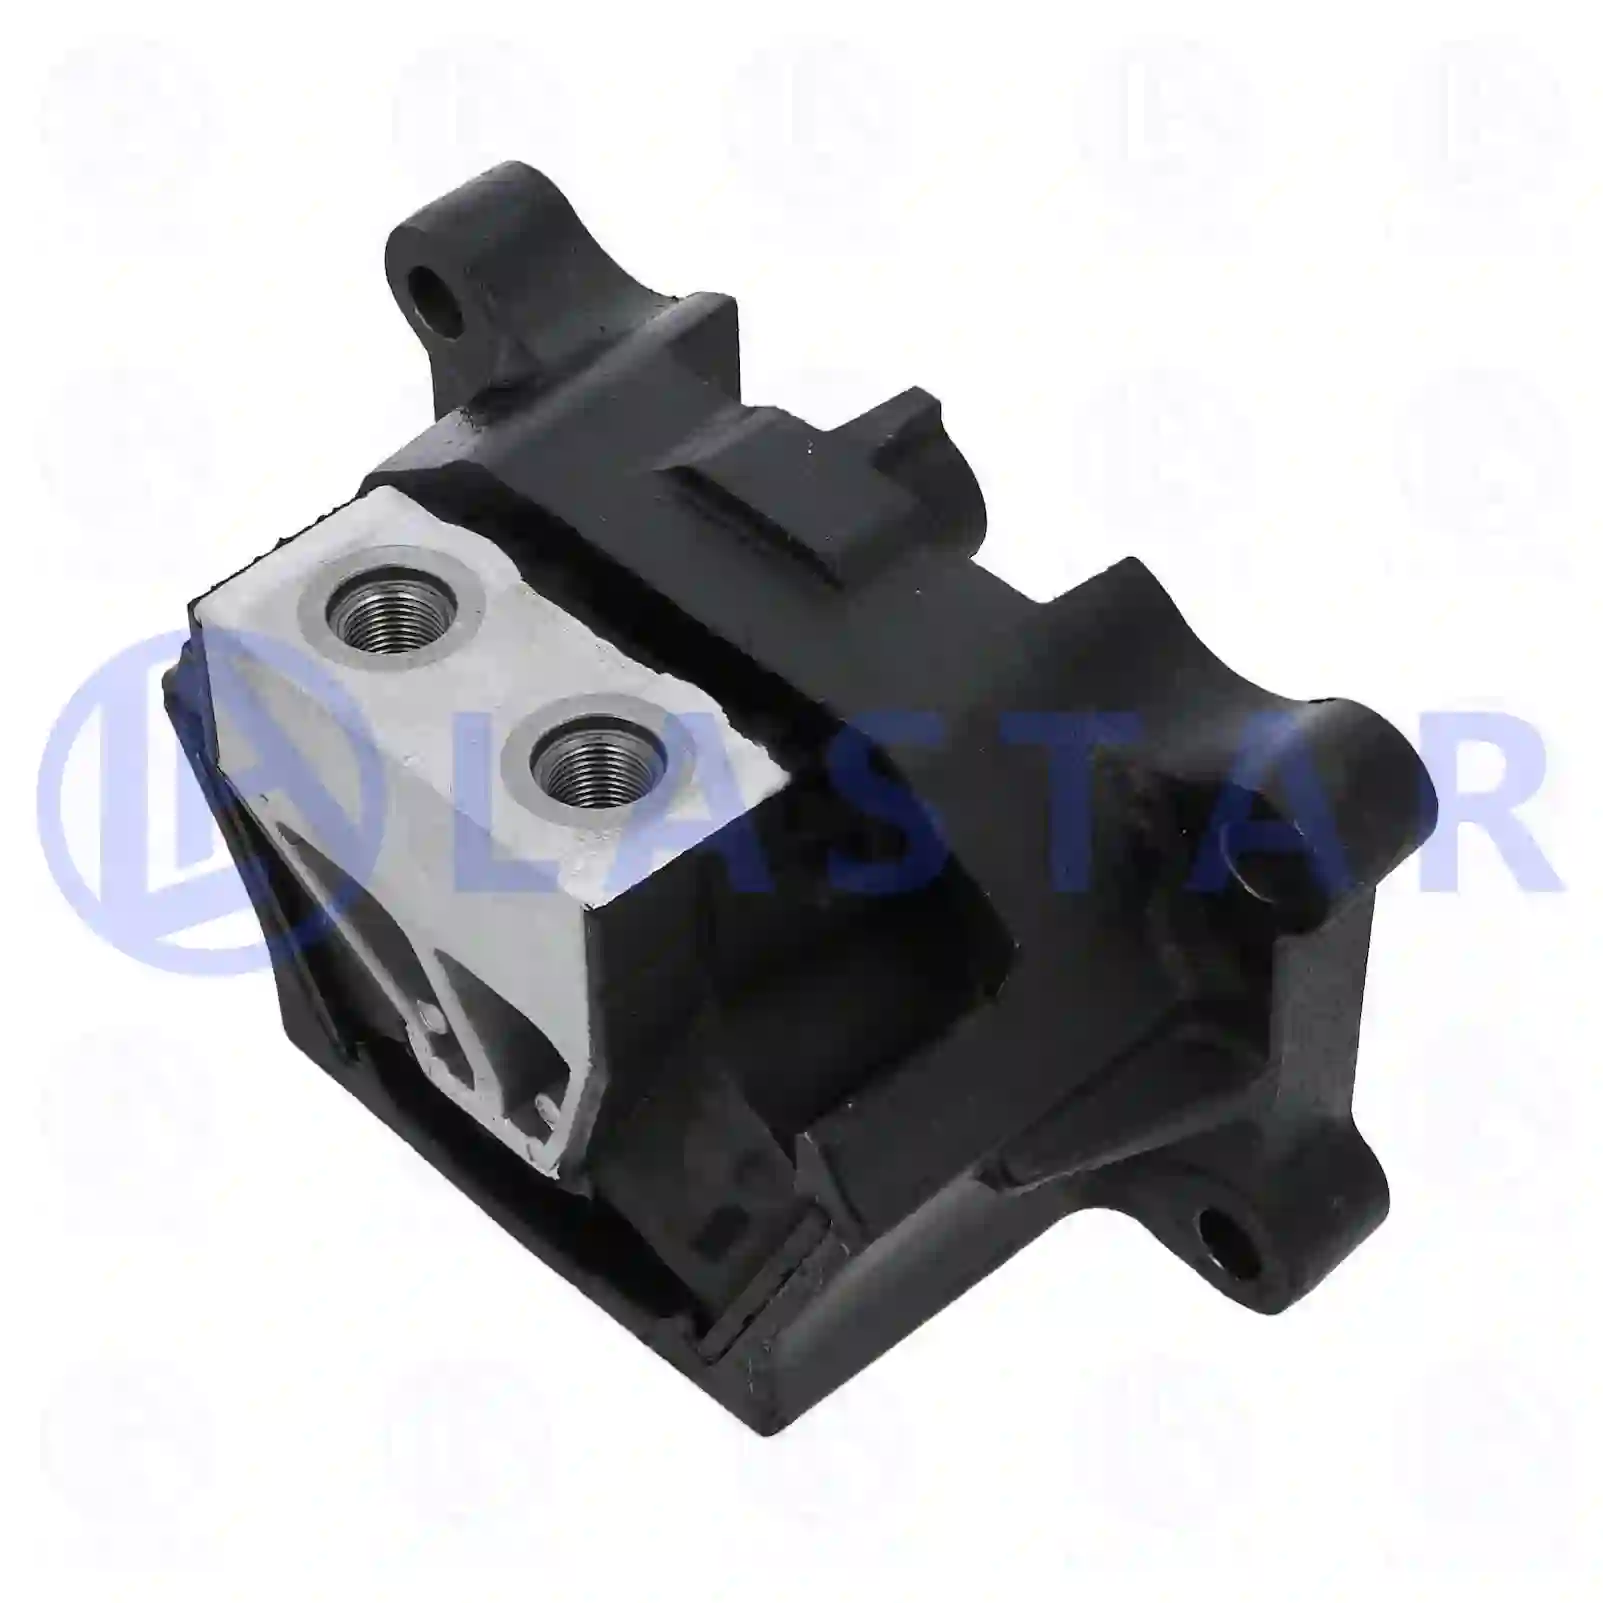 Engine mounting, 77702416, 9412418113, , , , ||  77702416 Lastar Spare Part | Truck Spare Parts, Auotomotive Spare Parts Engine mounting, 77702416, 9412418113, , , , ||  77702416 Lastar Spare Part | Truck Spare Parts, Auotomotive Spare Parts